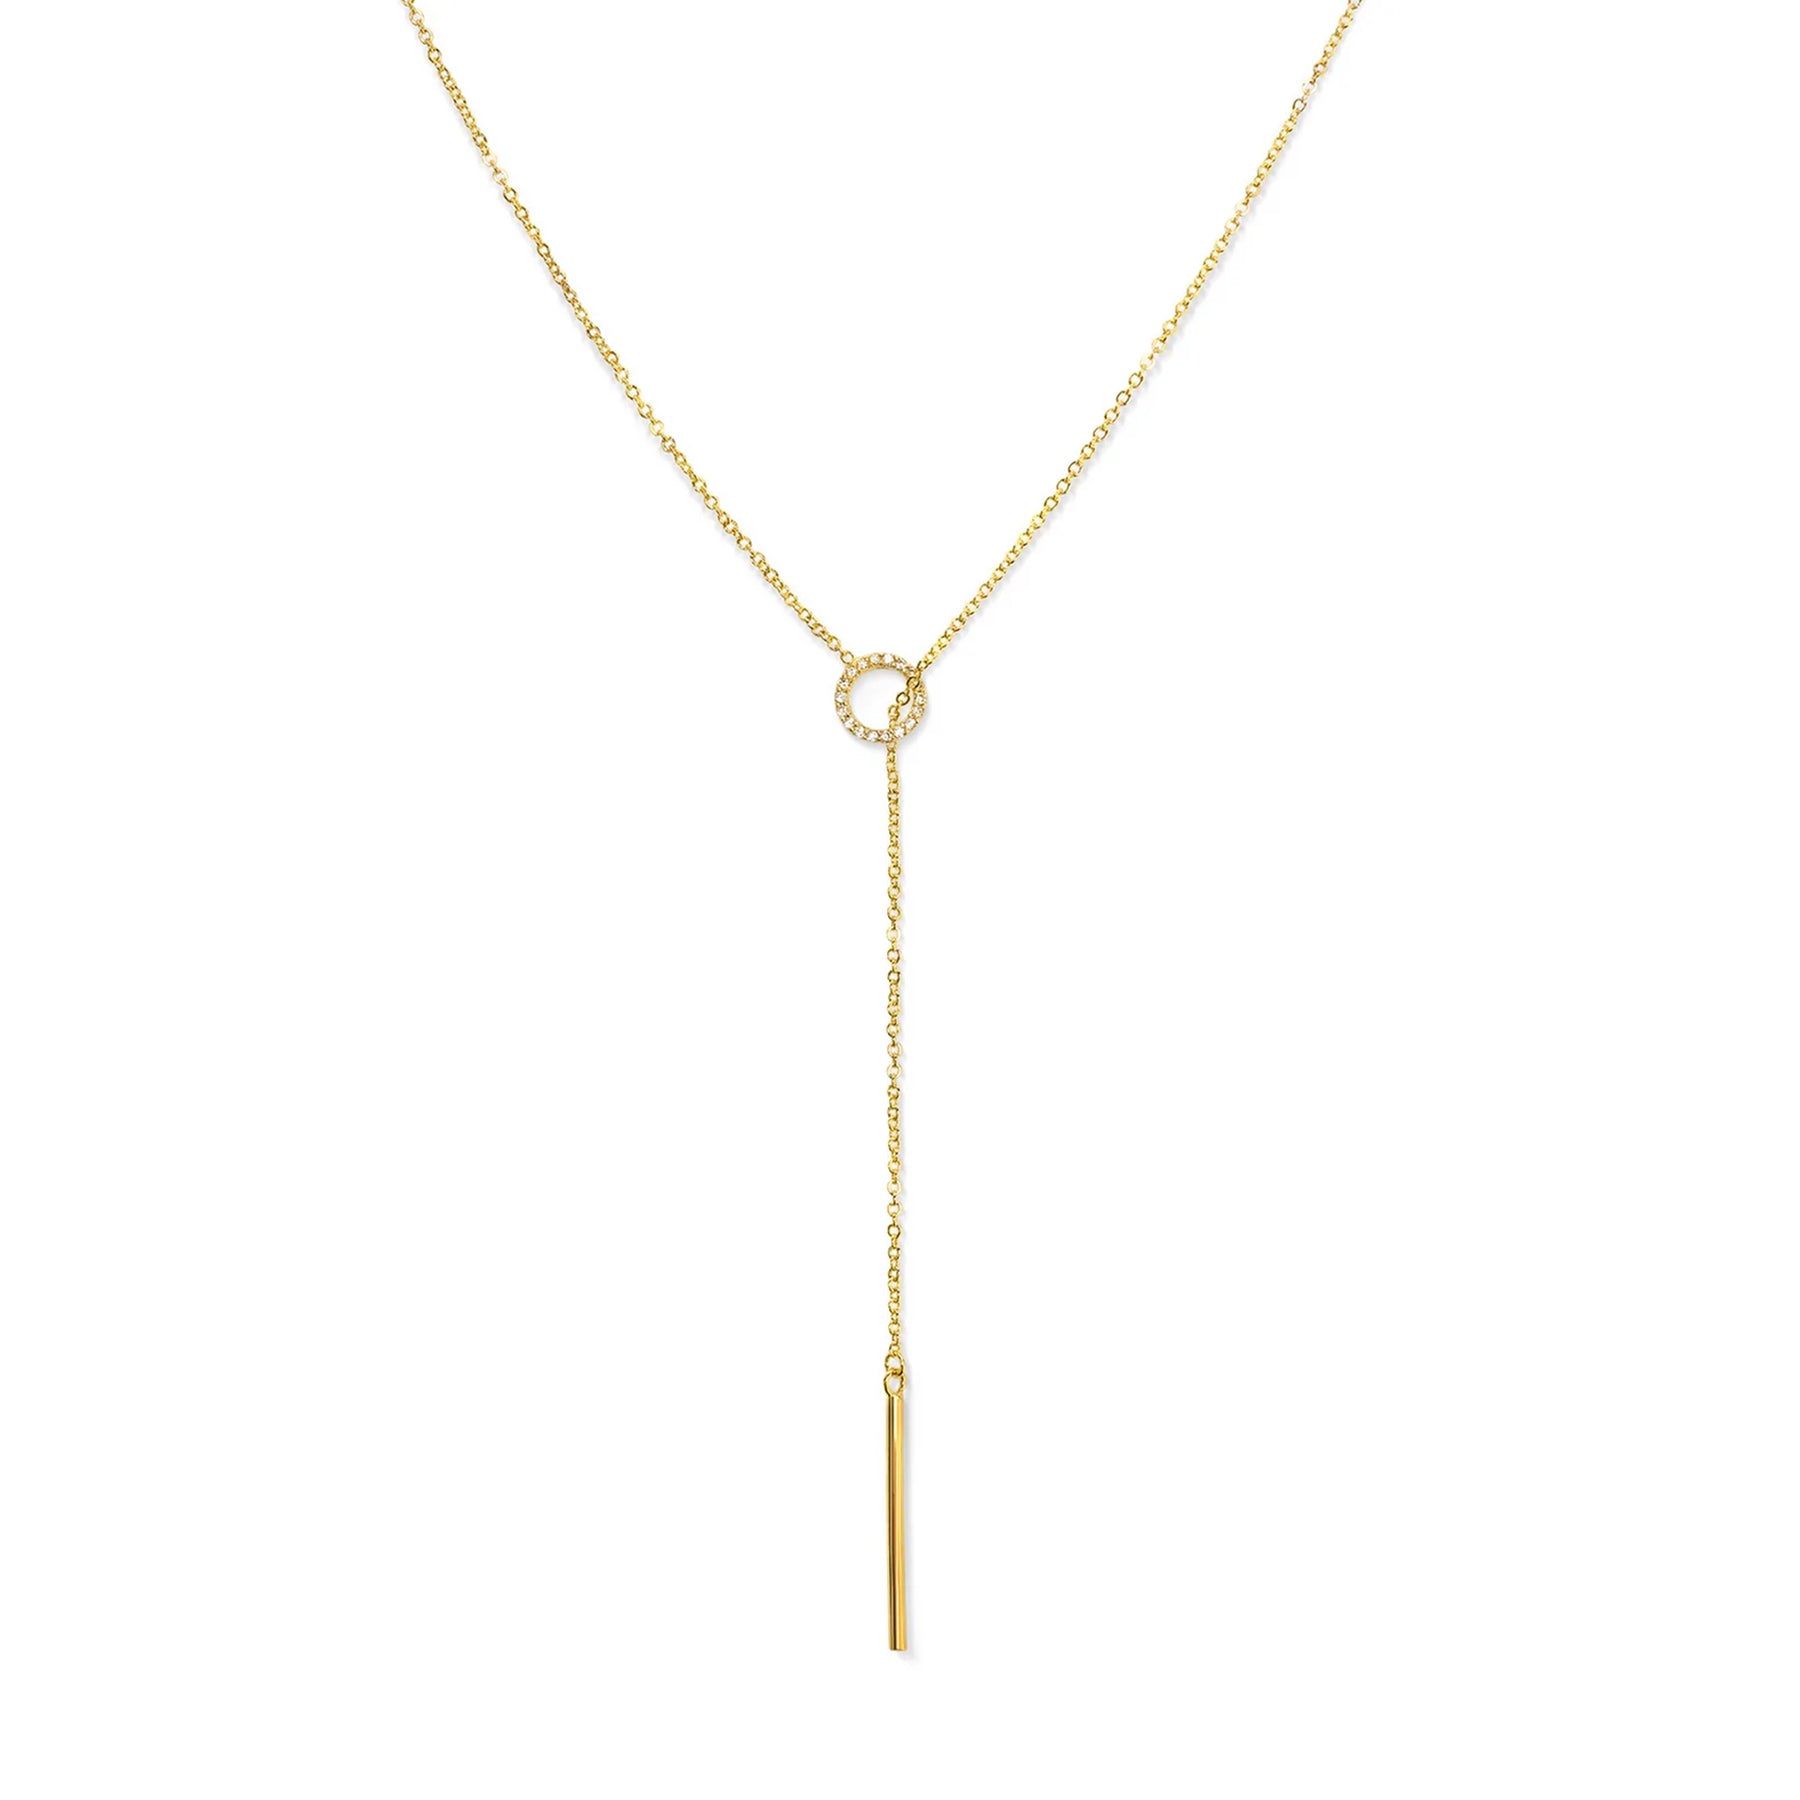 Benevolence La Lariat Necklace for Women, Gold Bar Necklace, Candace Cameron Designed Y Necklace for Women, Gold Necklace for Women, 14K Gold